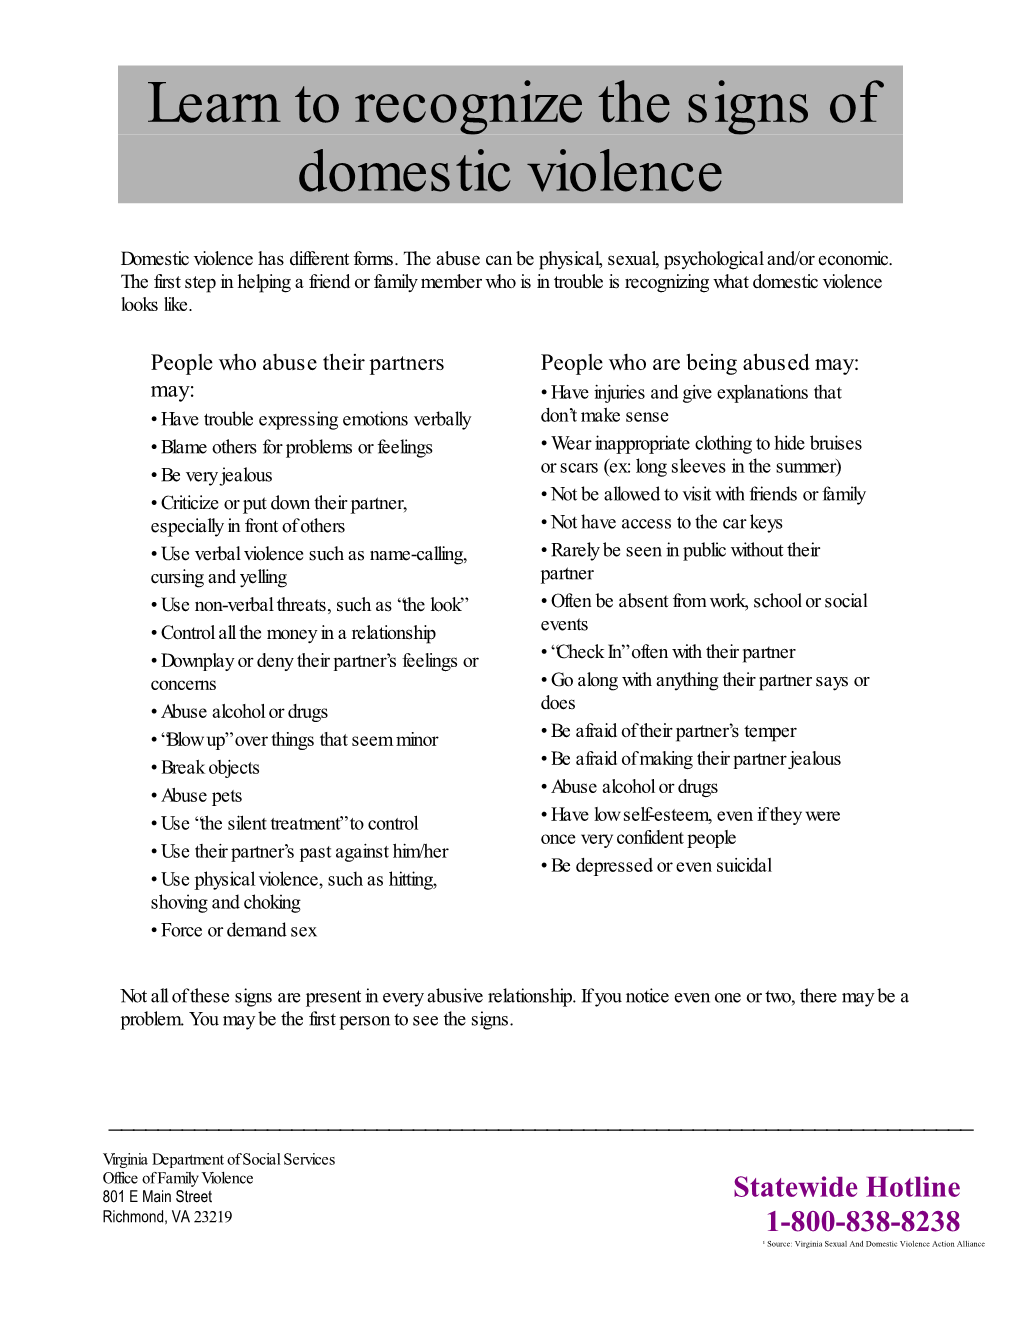 Learn to Recognize the Signs of Domestic Violence